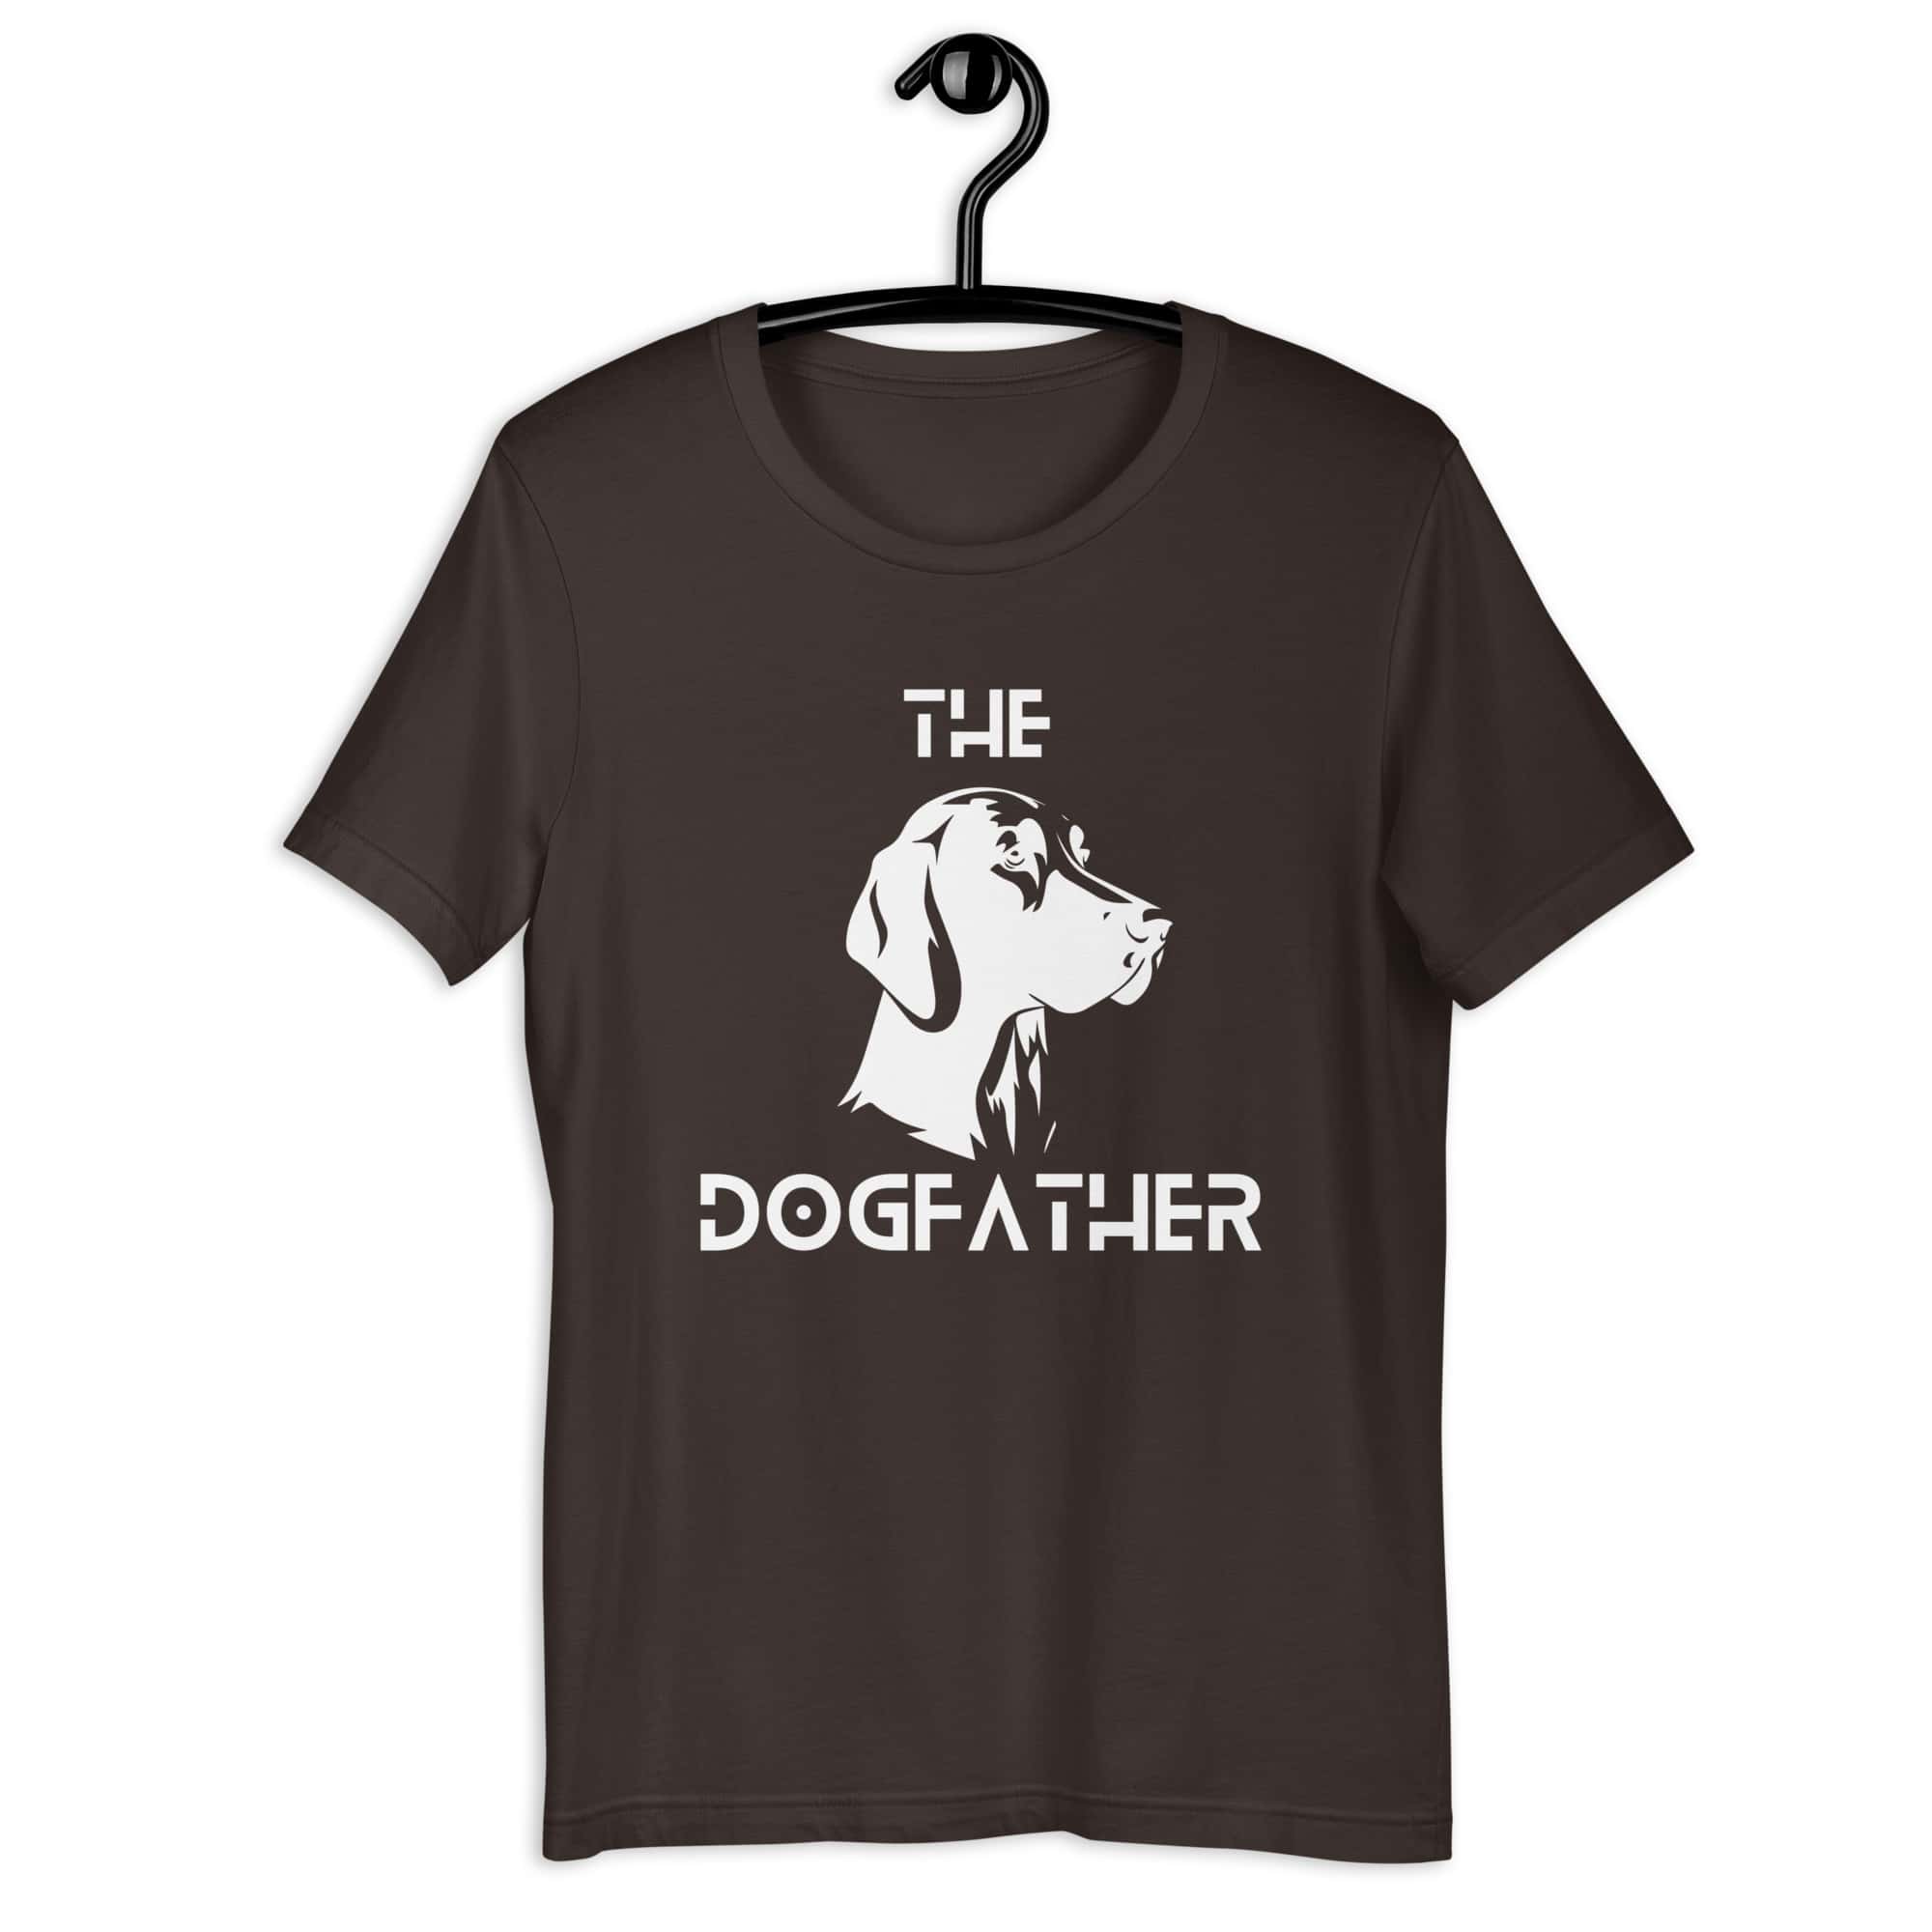 The Dogfather Retrievers Unisex T-Shirt. Brown